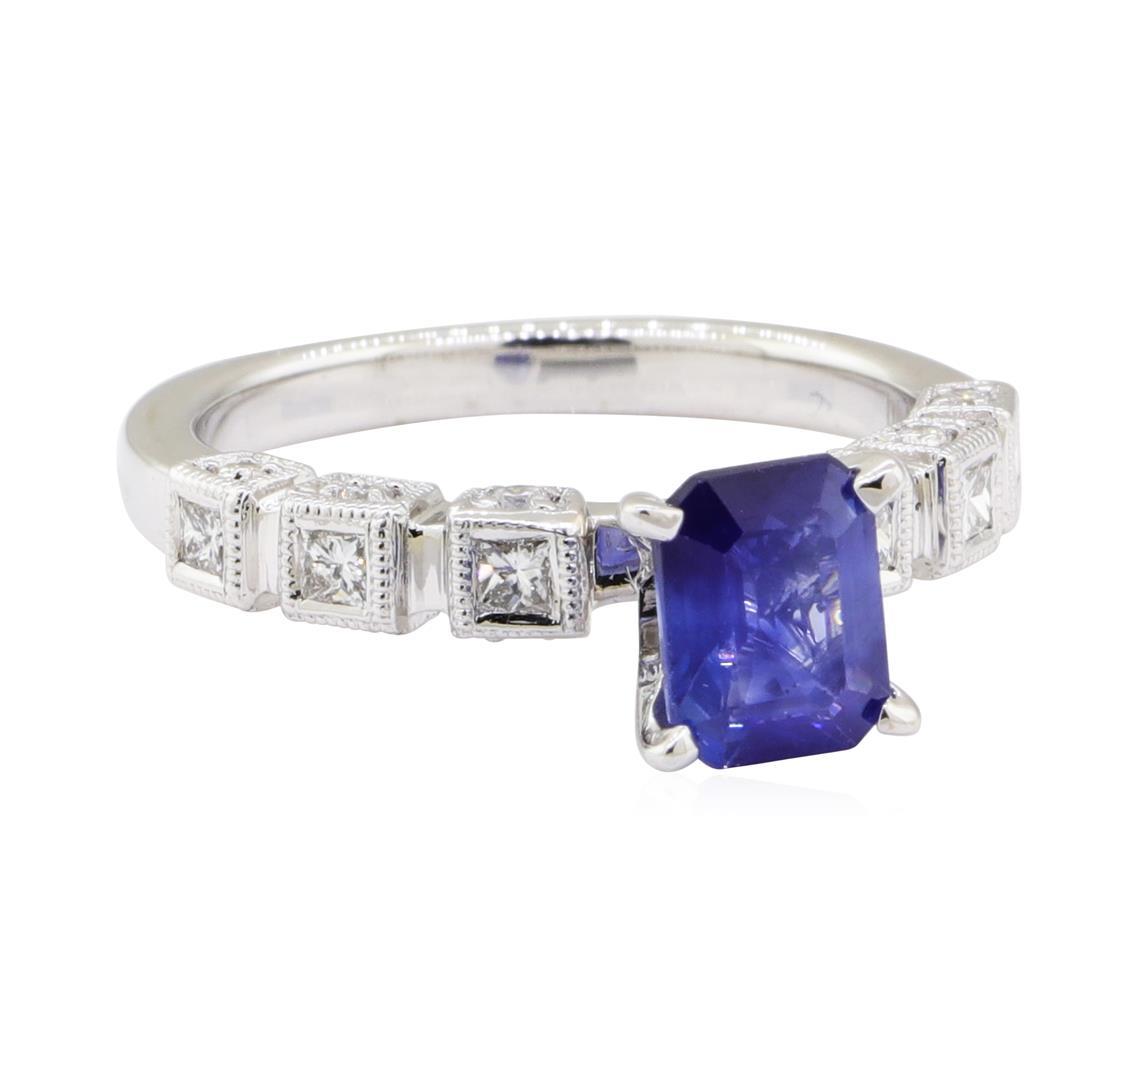 1.75 ctw Sapphire and Diamond Ring - 18KT White Gold